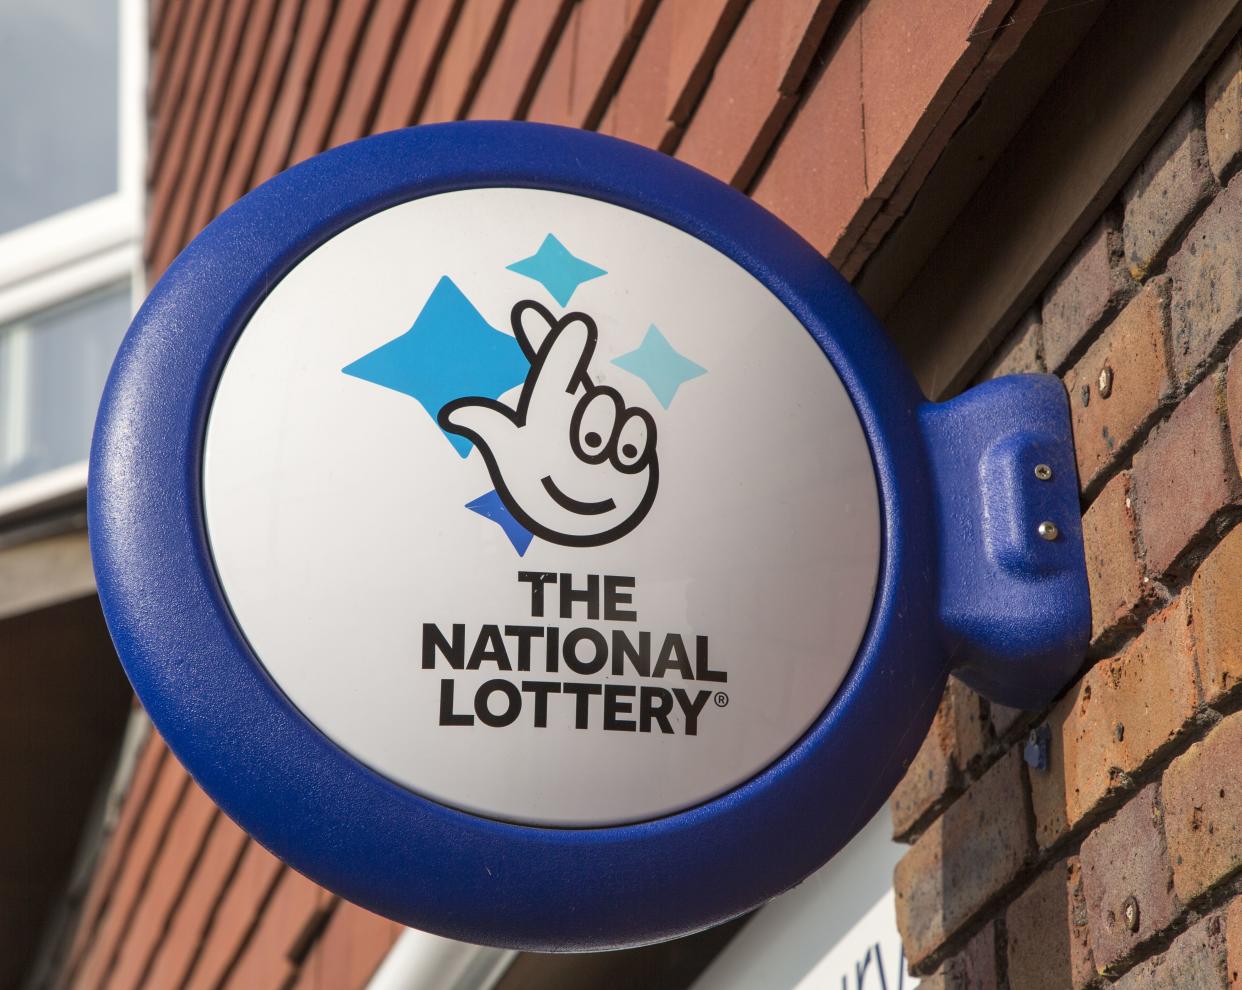 Wall mounted sign for the National Lottery, Amesbury, Wiltshire, England, UK. (Photo by: Geography Photos/Universal Images Group via Getty Images)